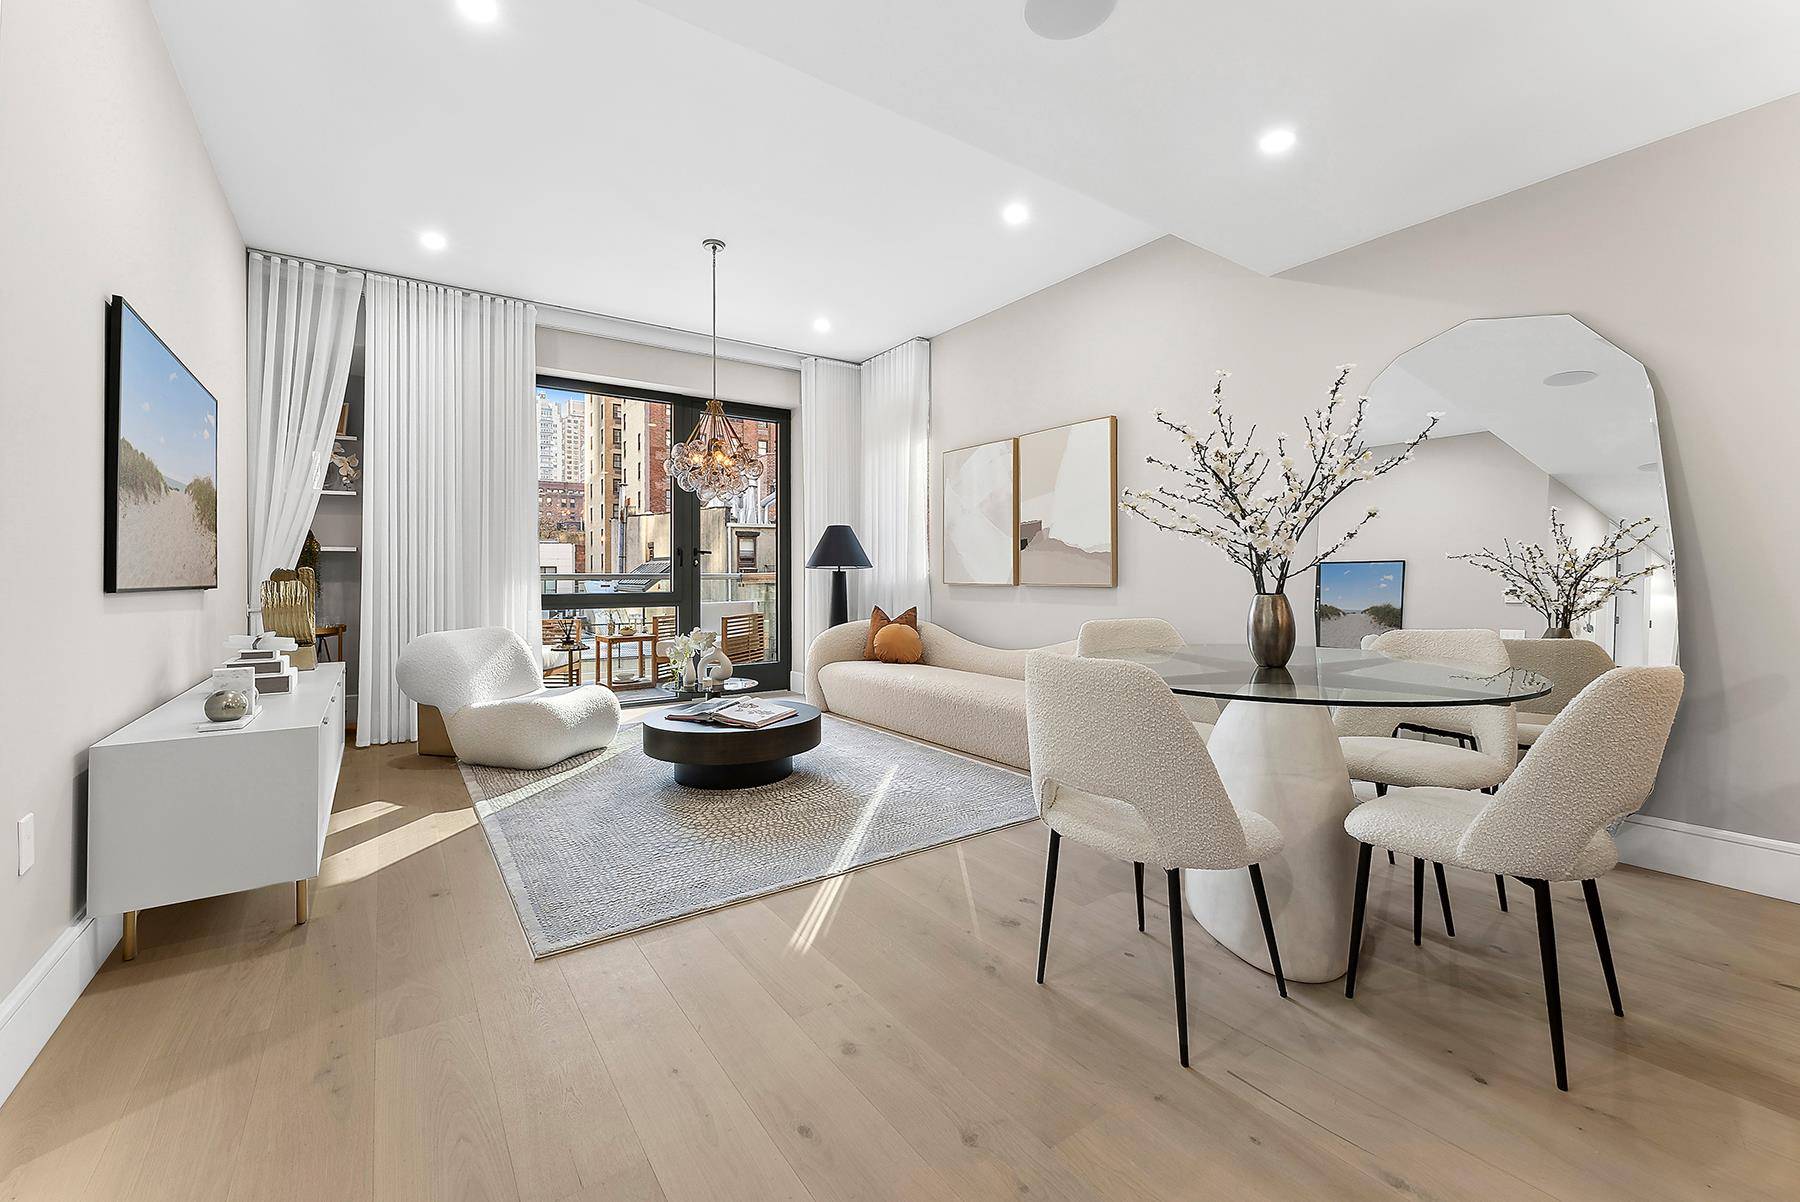 Model Residences Open by Appointment Immediate OccupancyIntroducing Minuet Life in RhythmMinuet is an emblem of tranquility in the heart of Manhattan.